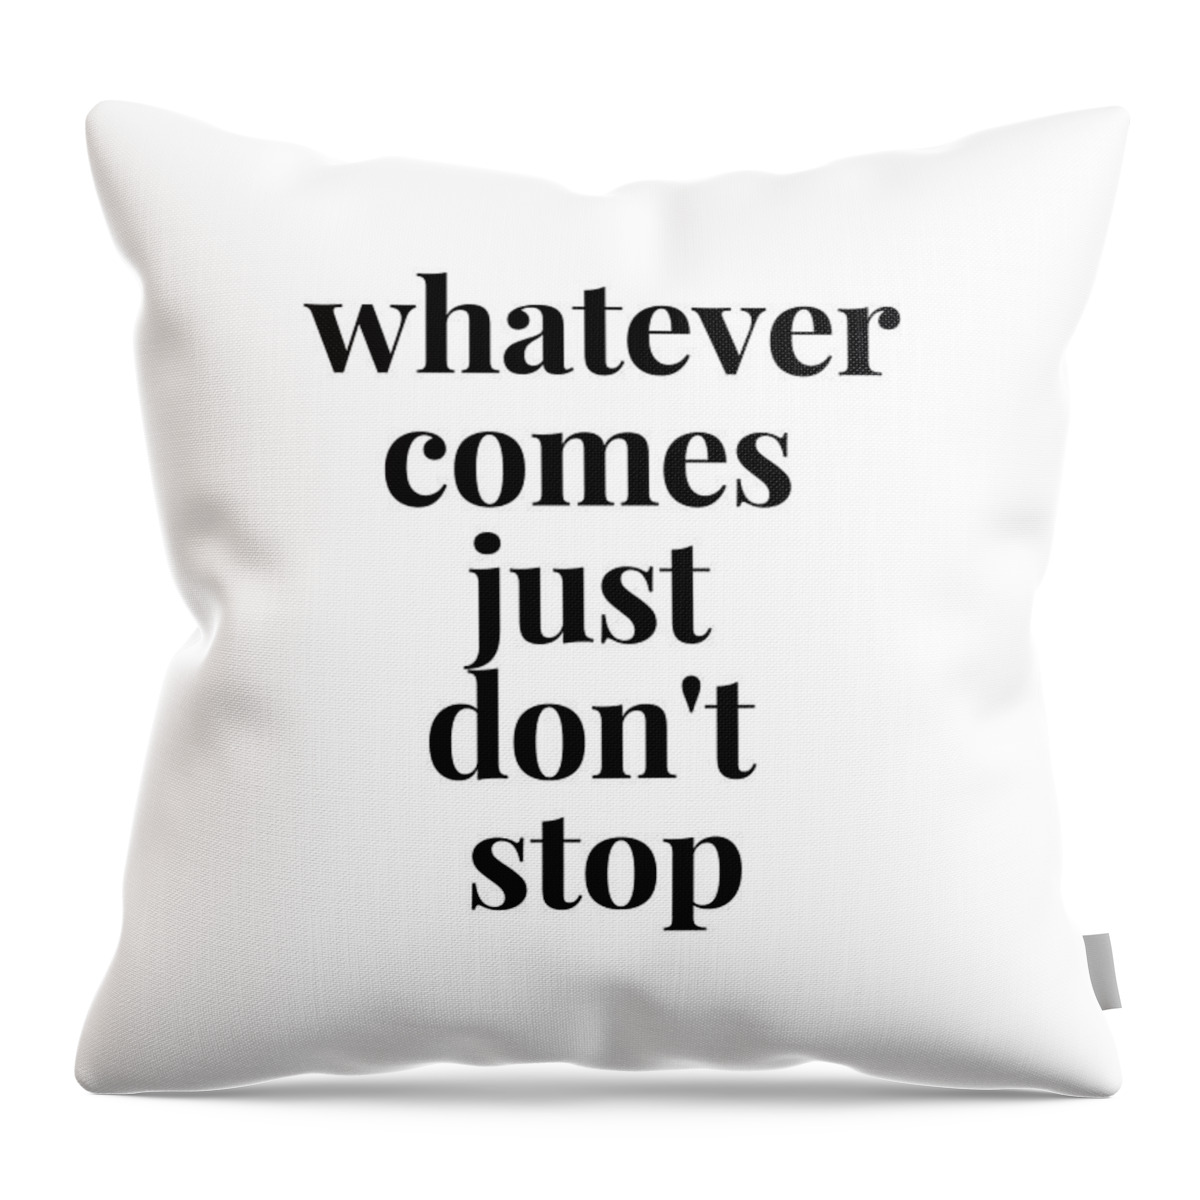 My Best Throw Pillow Tips, Dos and Don'ts